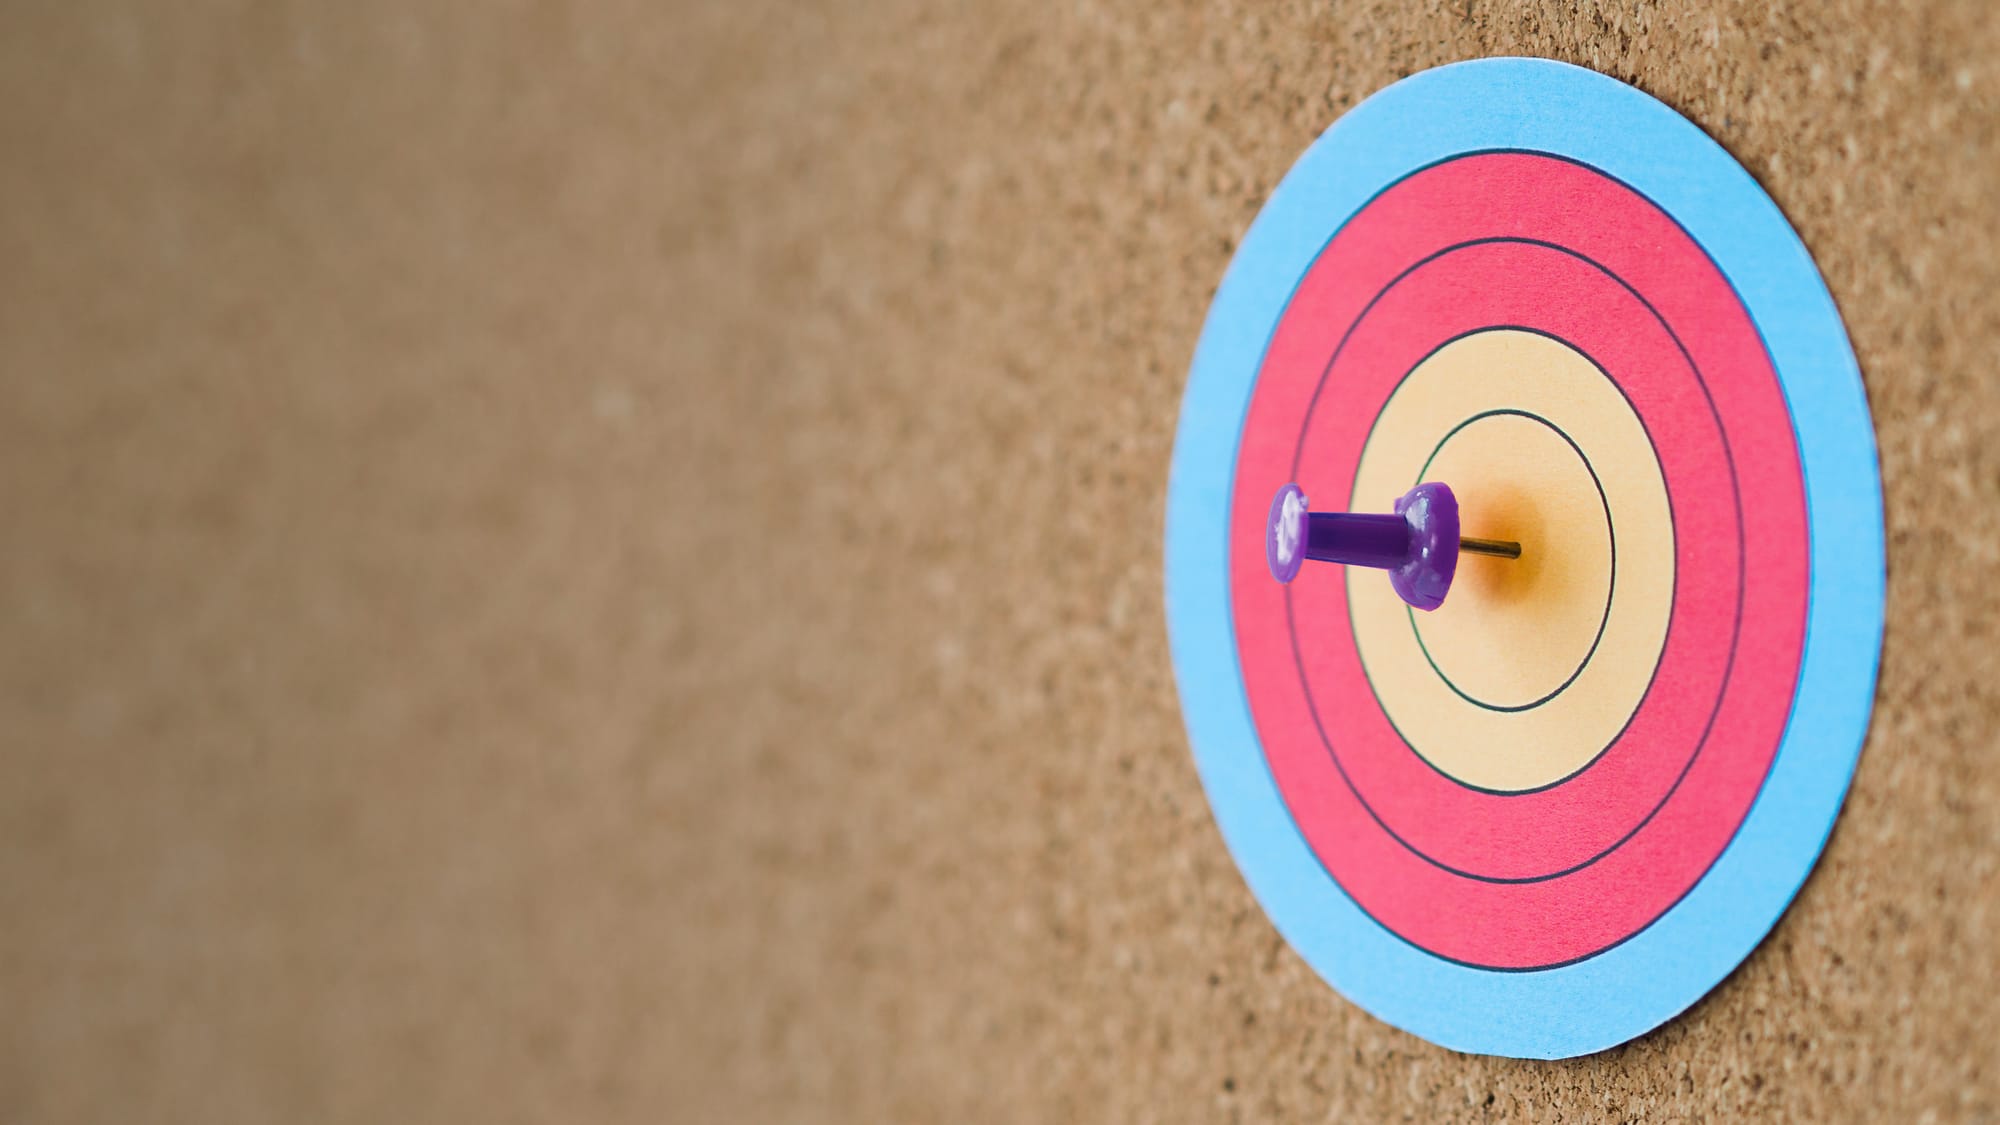 An image showing a purple pin penetrating through a colorful paper target on a wall.